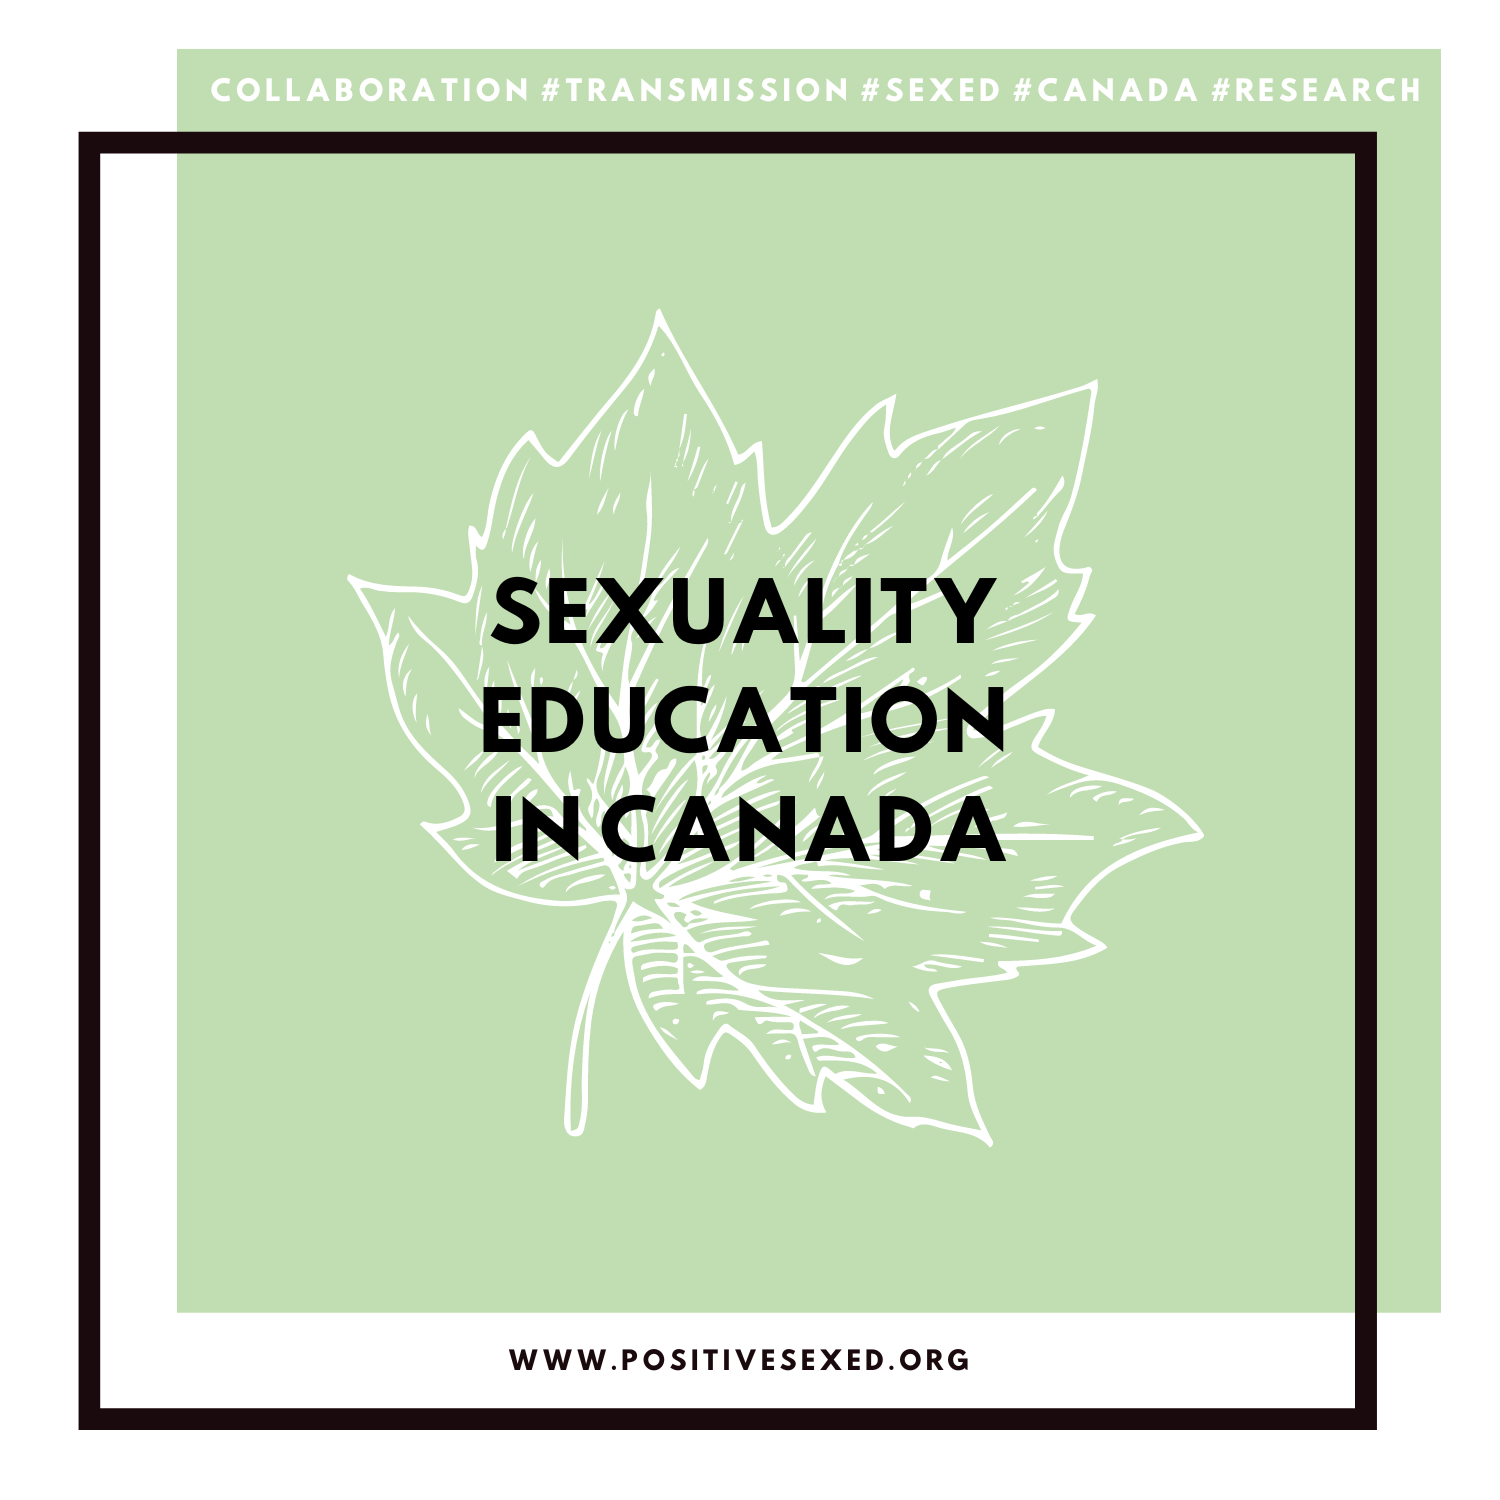 Sexuality education in Canada